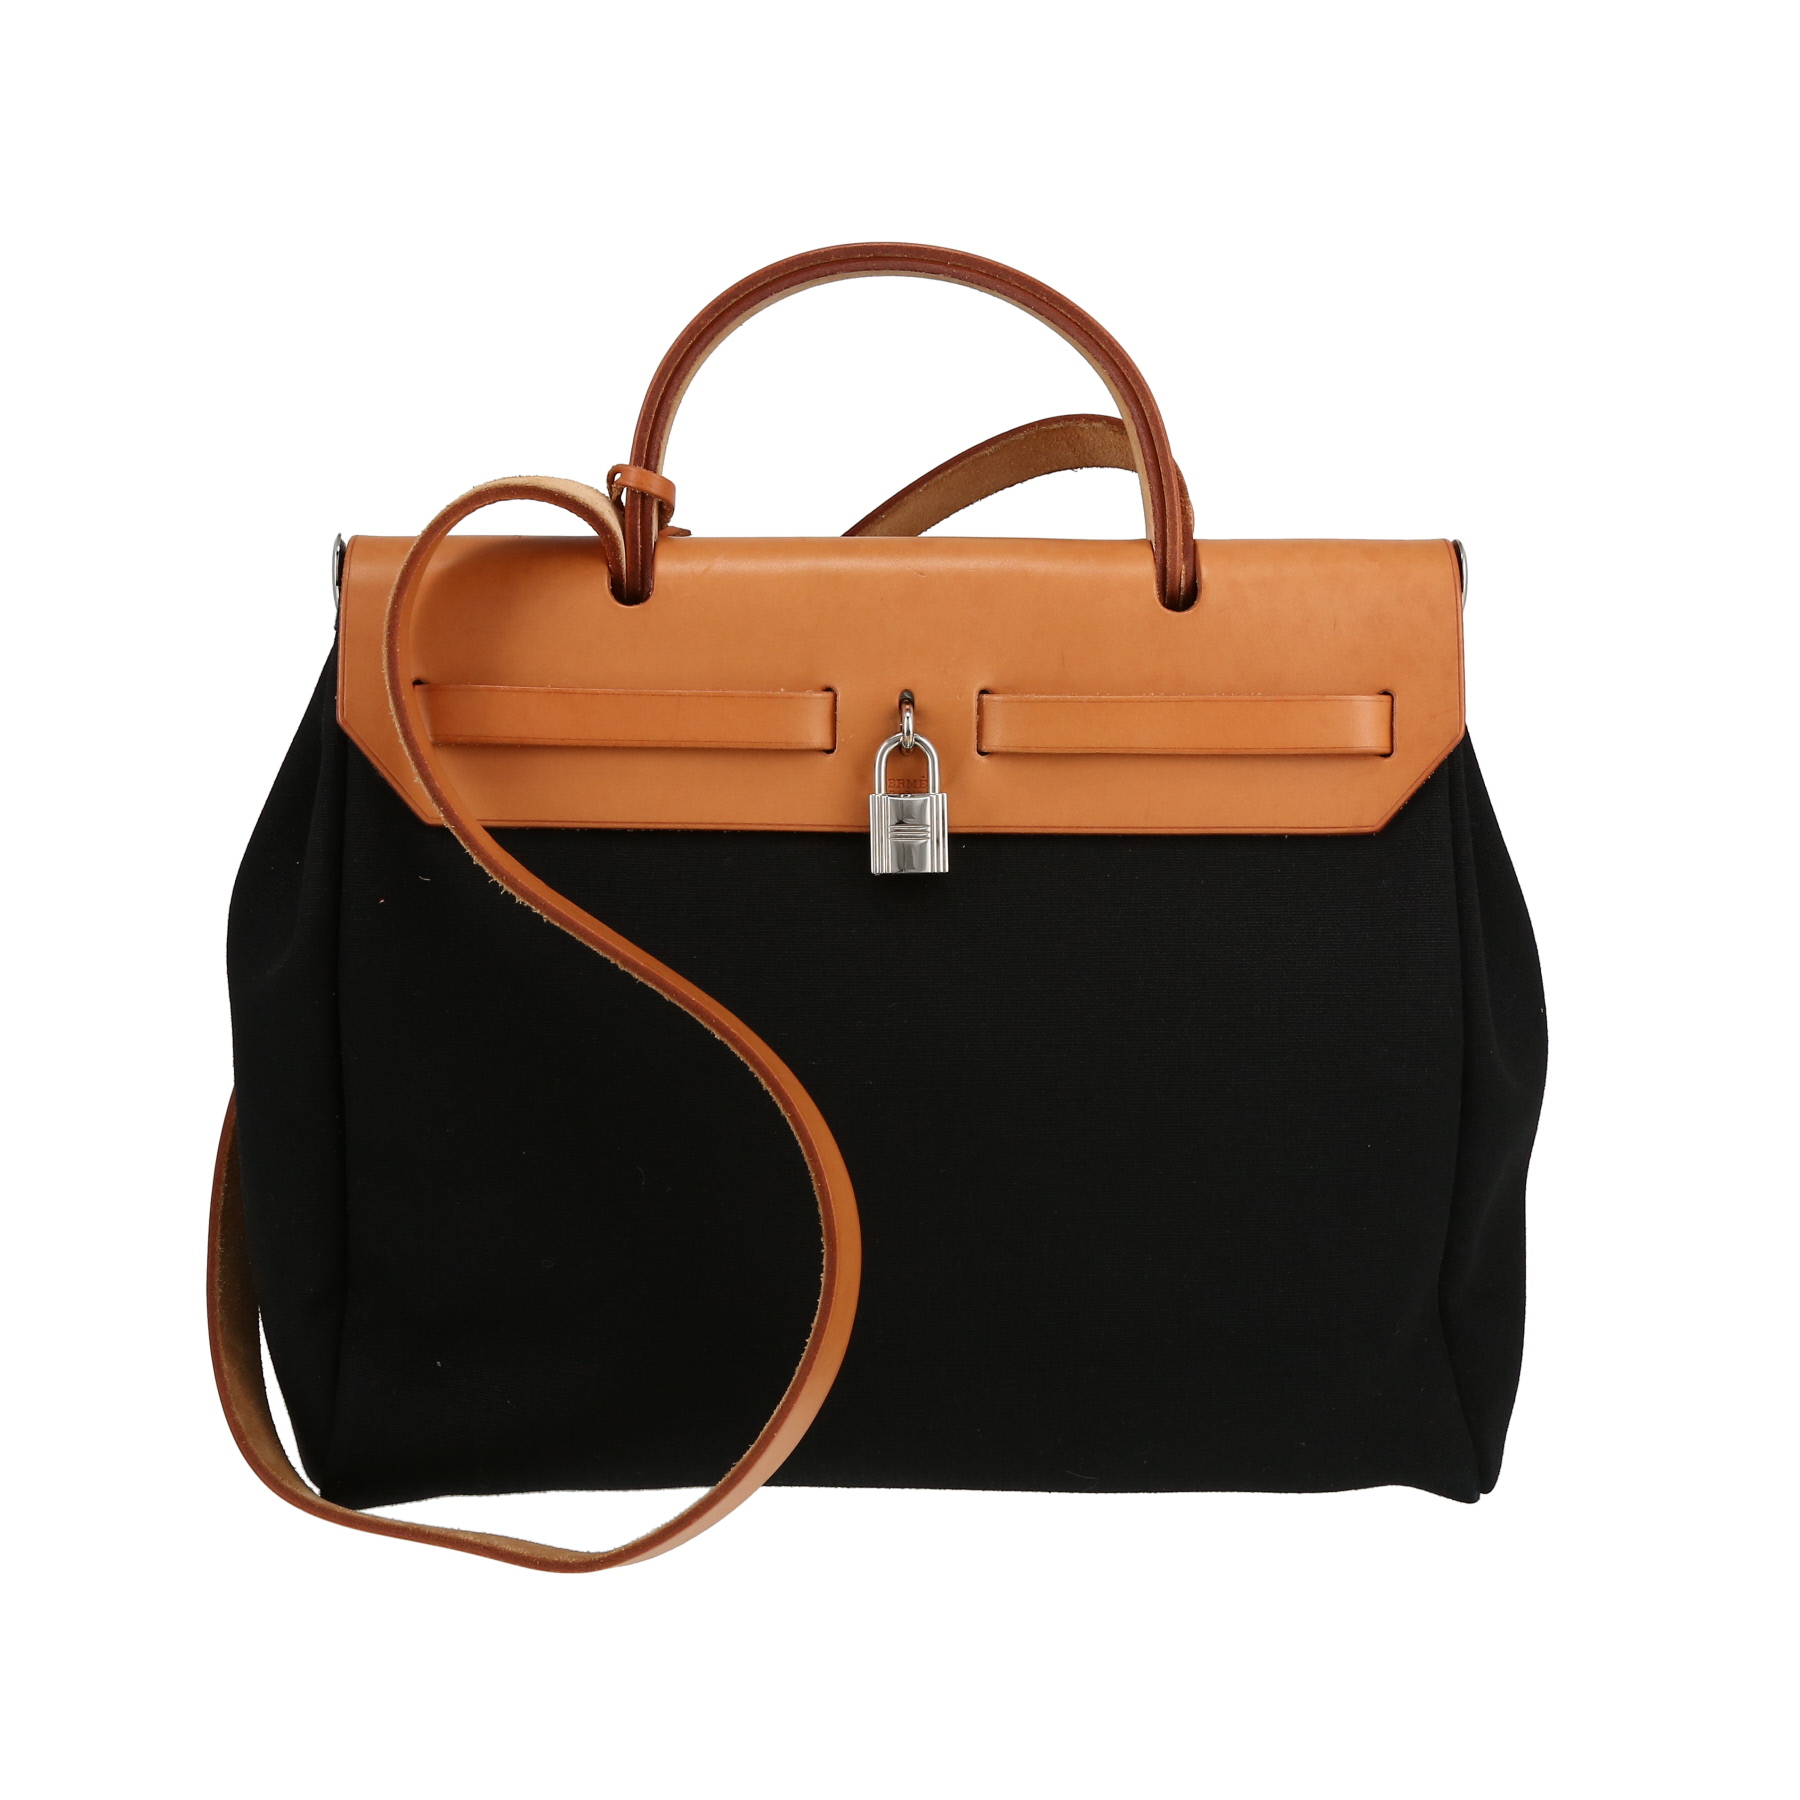 Herbag Handbag In Black Canvas And Natural Leather